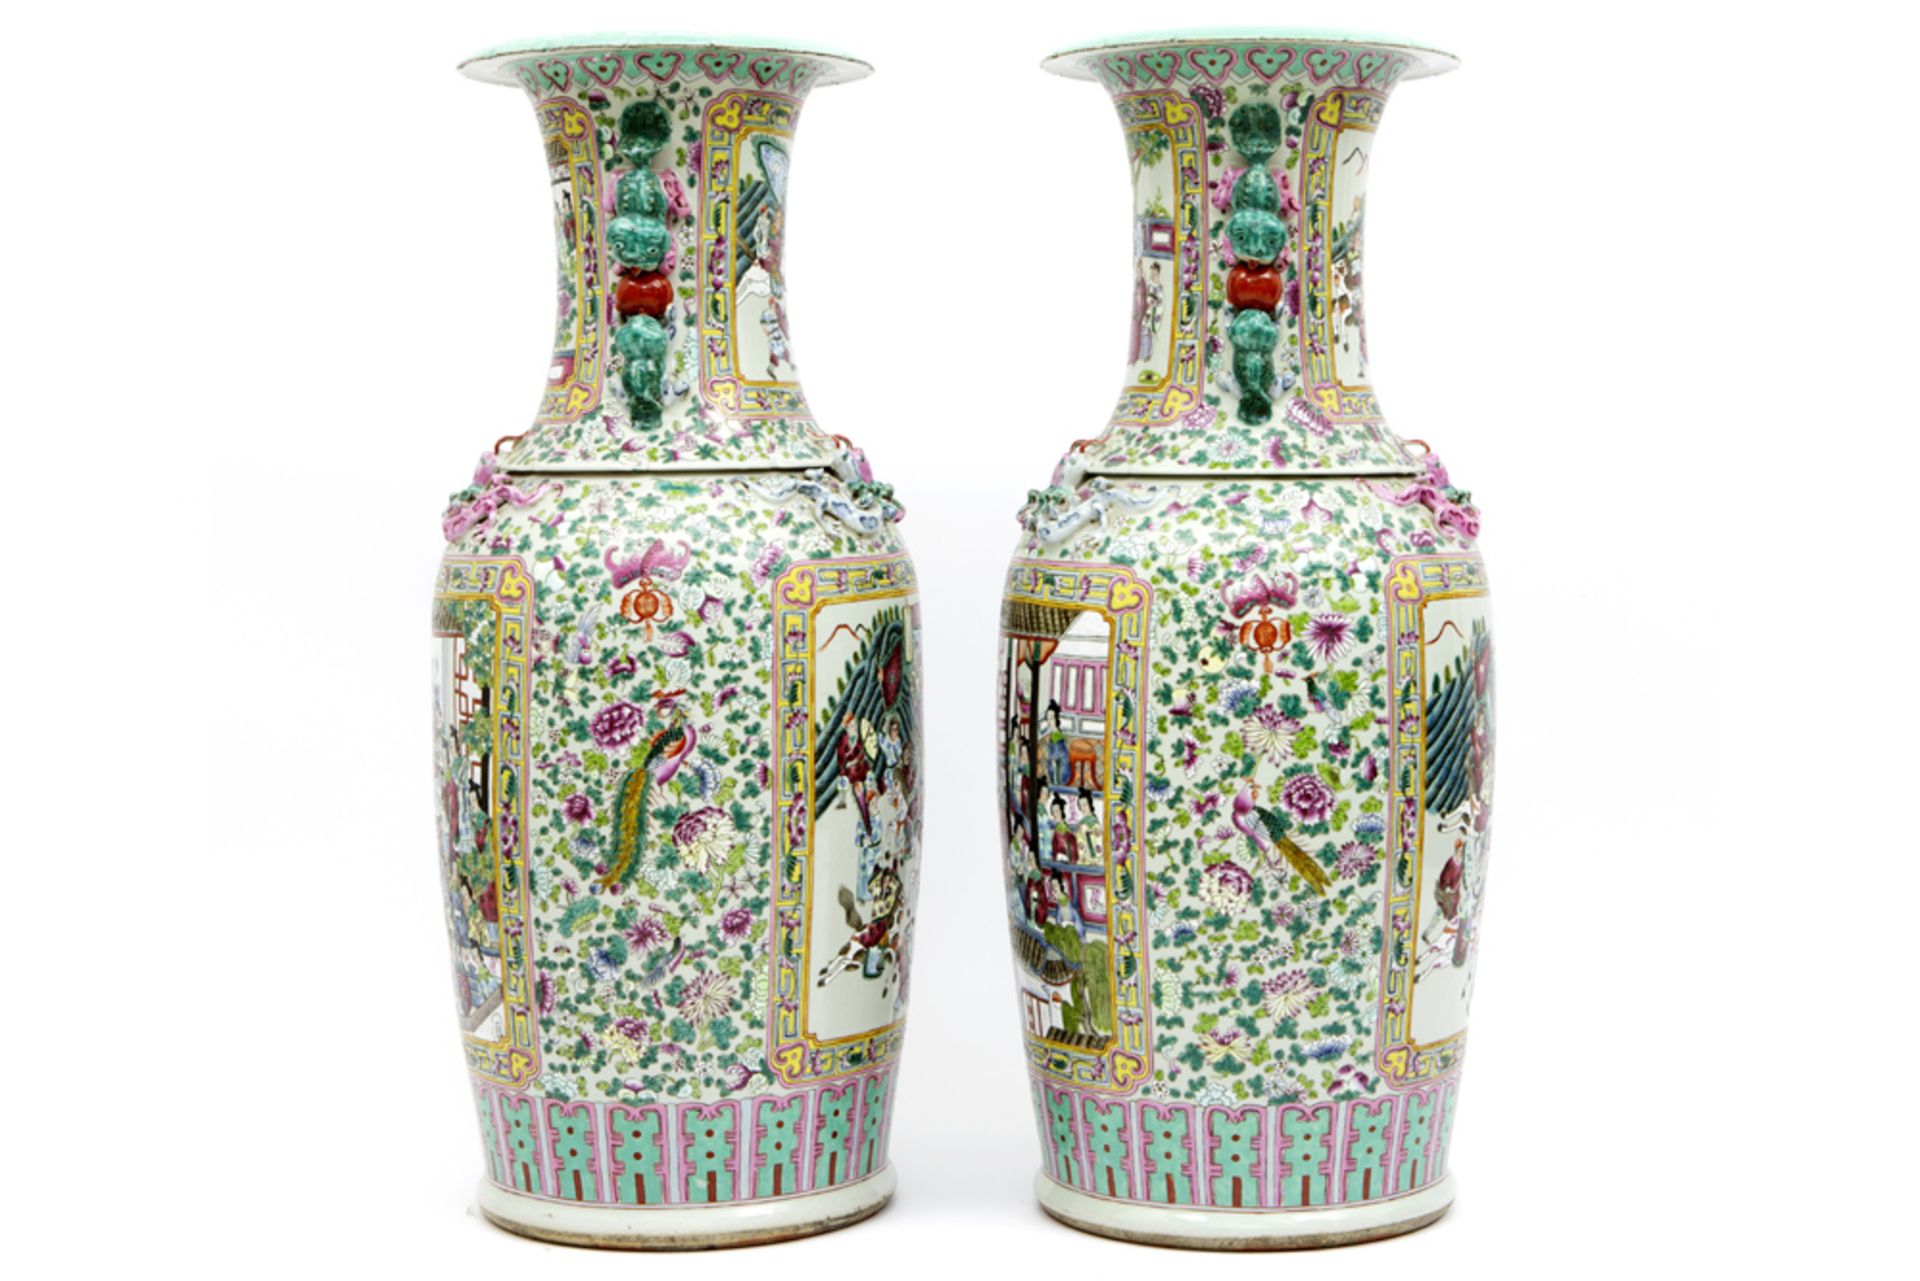 impressive pair of 19th Cent. Chinese vases (100 cm high) in porcelain with rich polychrome - Bild 2 aus 6